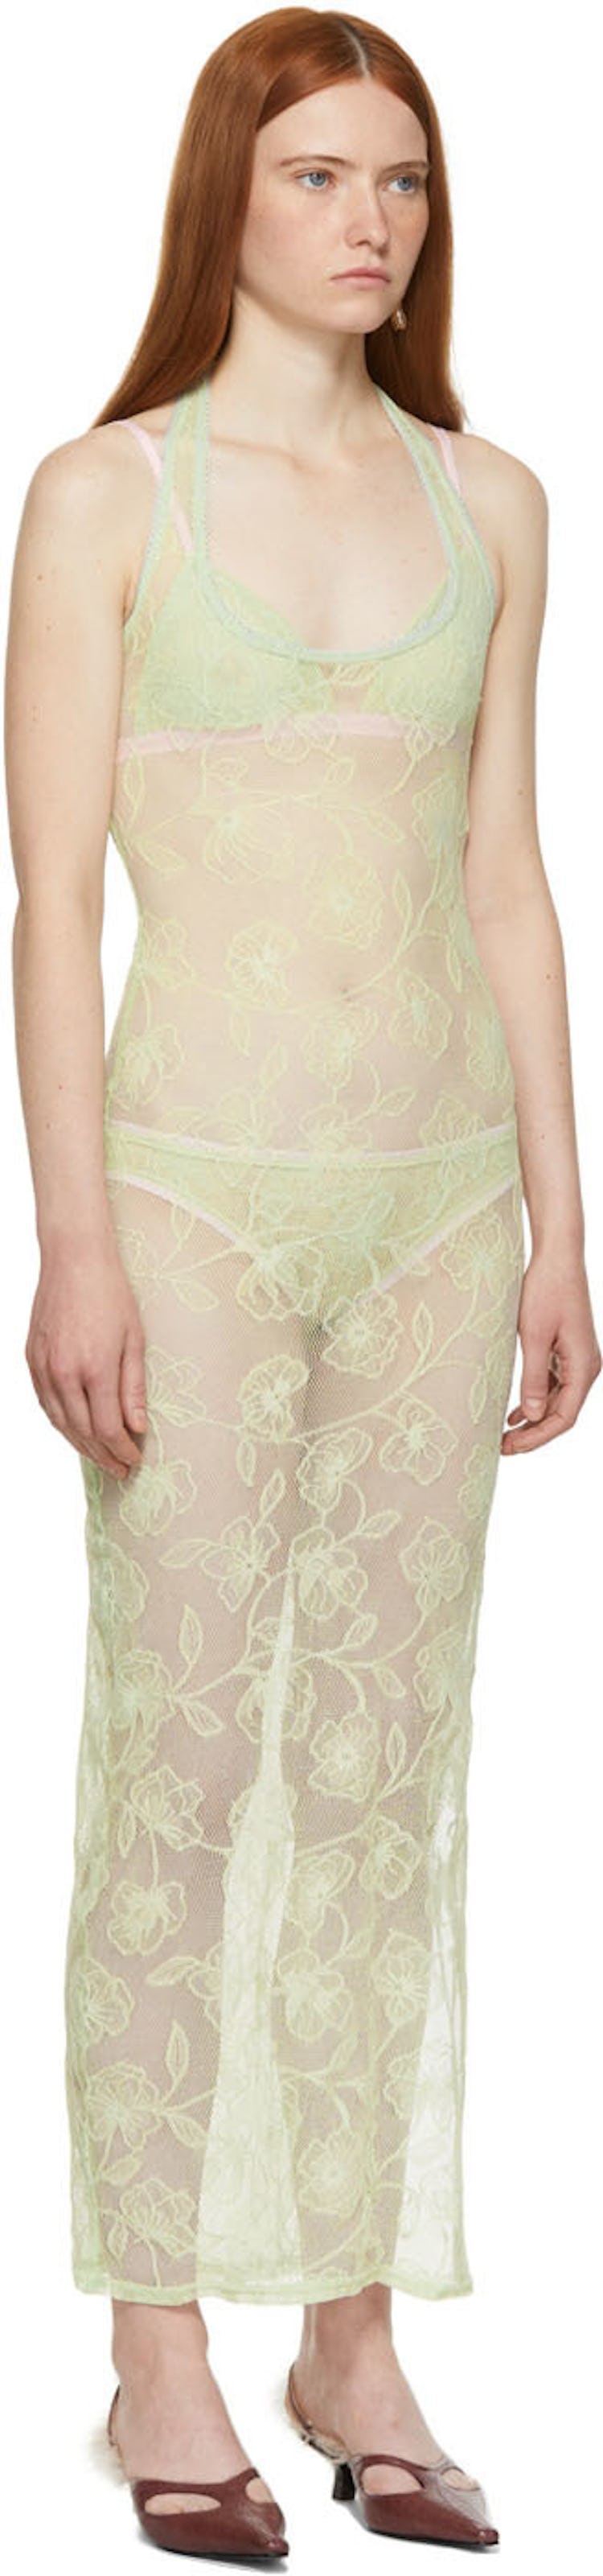 SSENSE Exclusive Green Lace Halter Dress: additional image